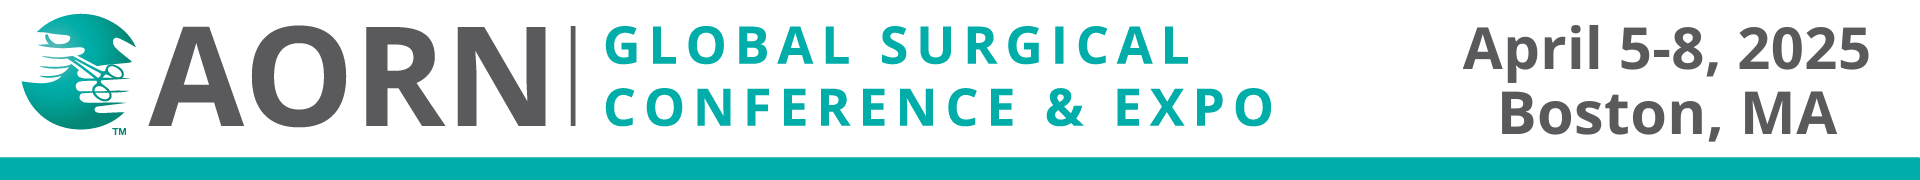 2025 AORN Global Surgical Conference Event Banner